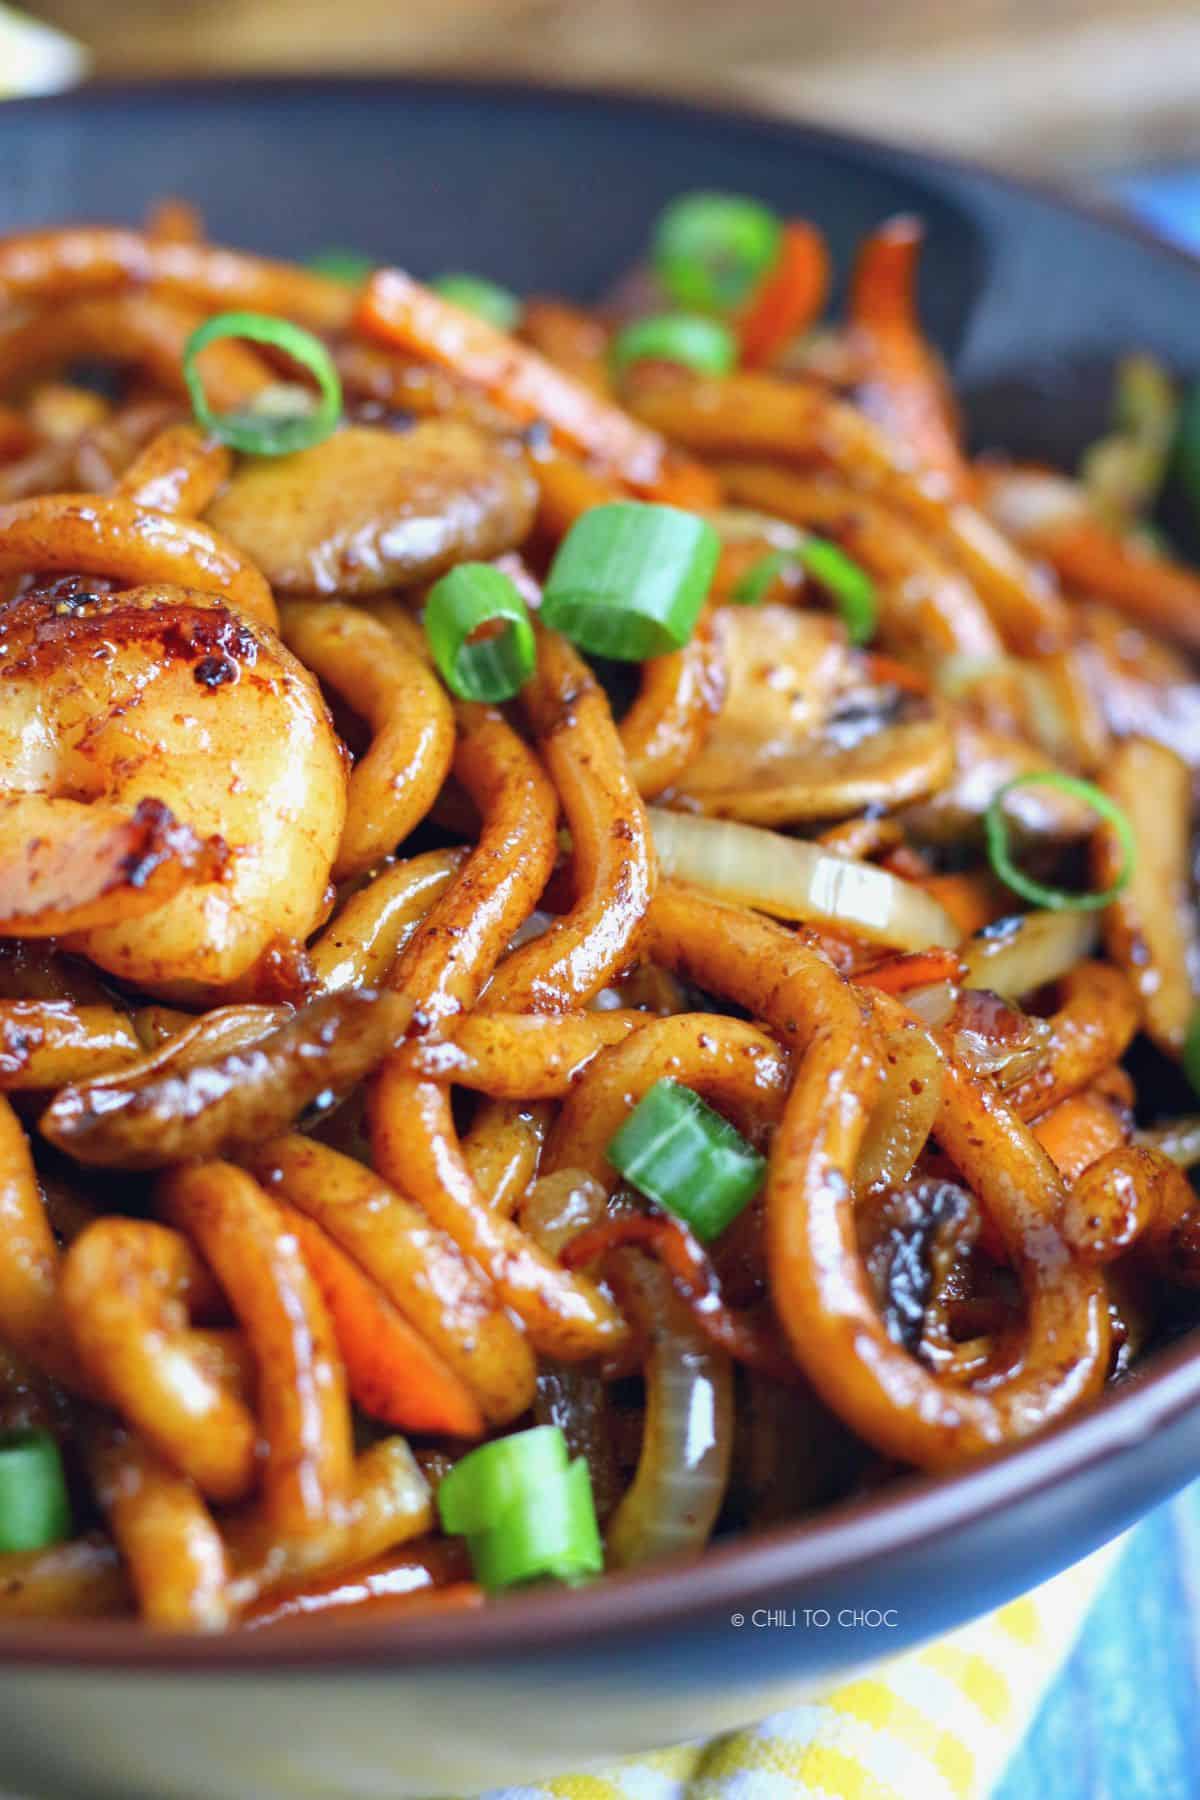 Udon noodles tossed in a savoury sauce with shrimp